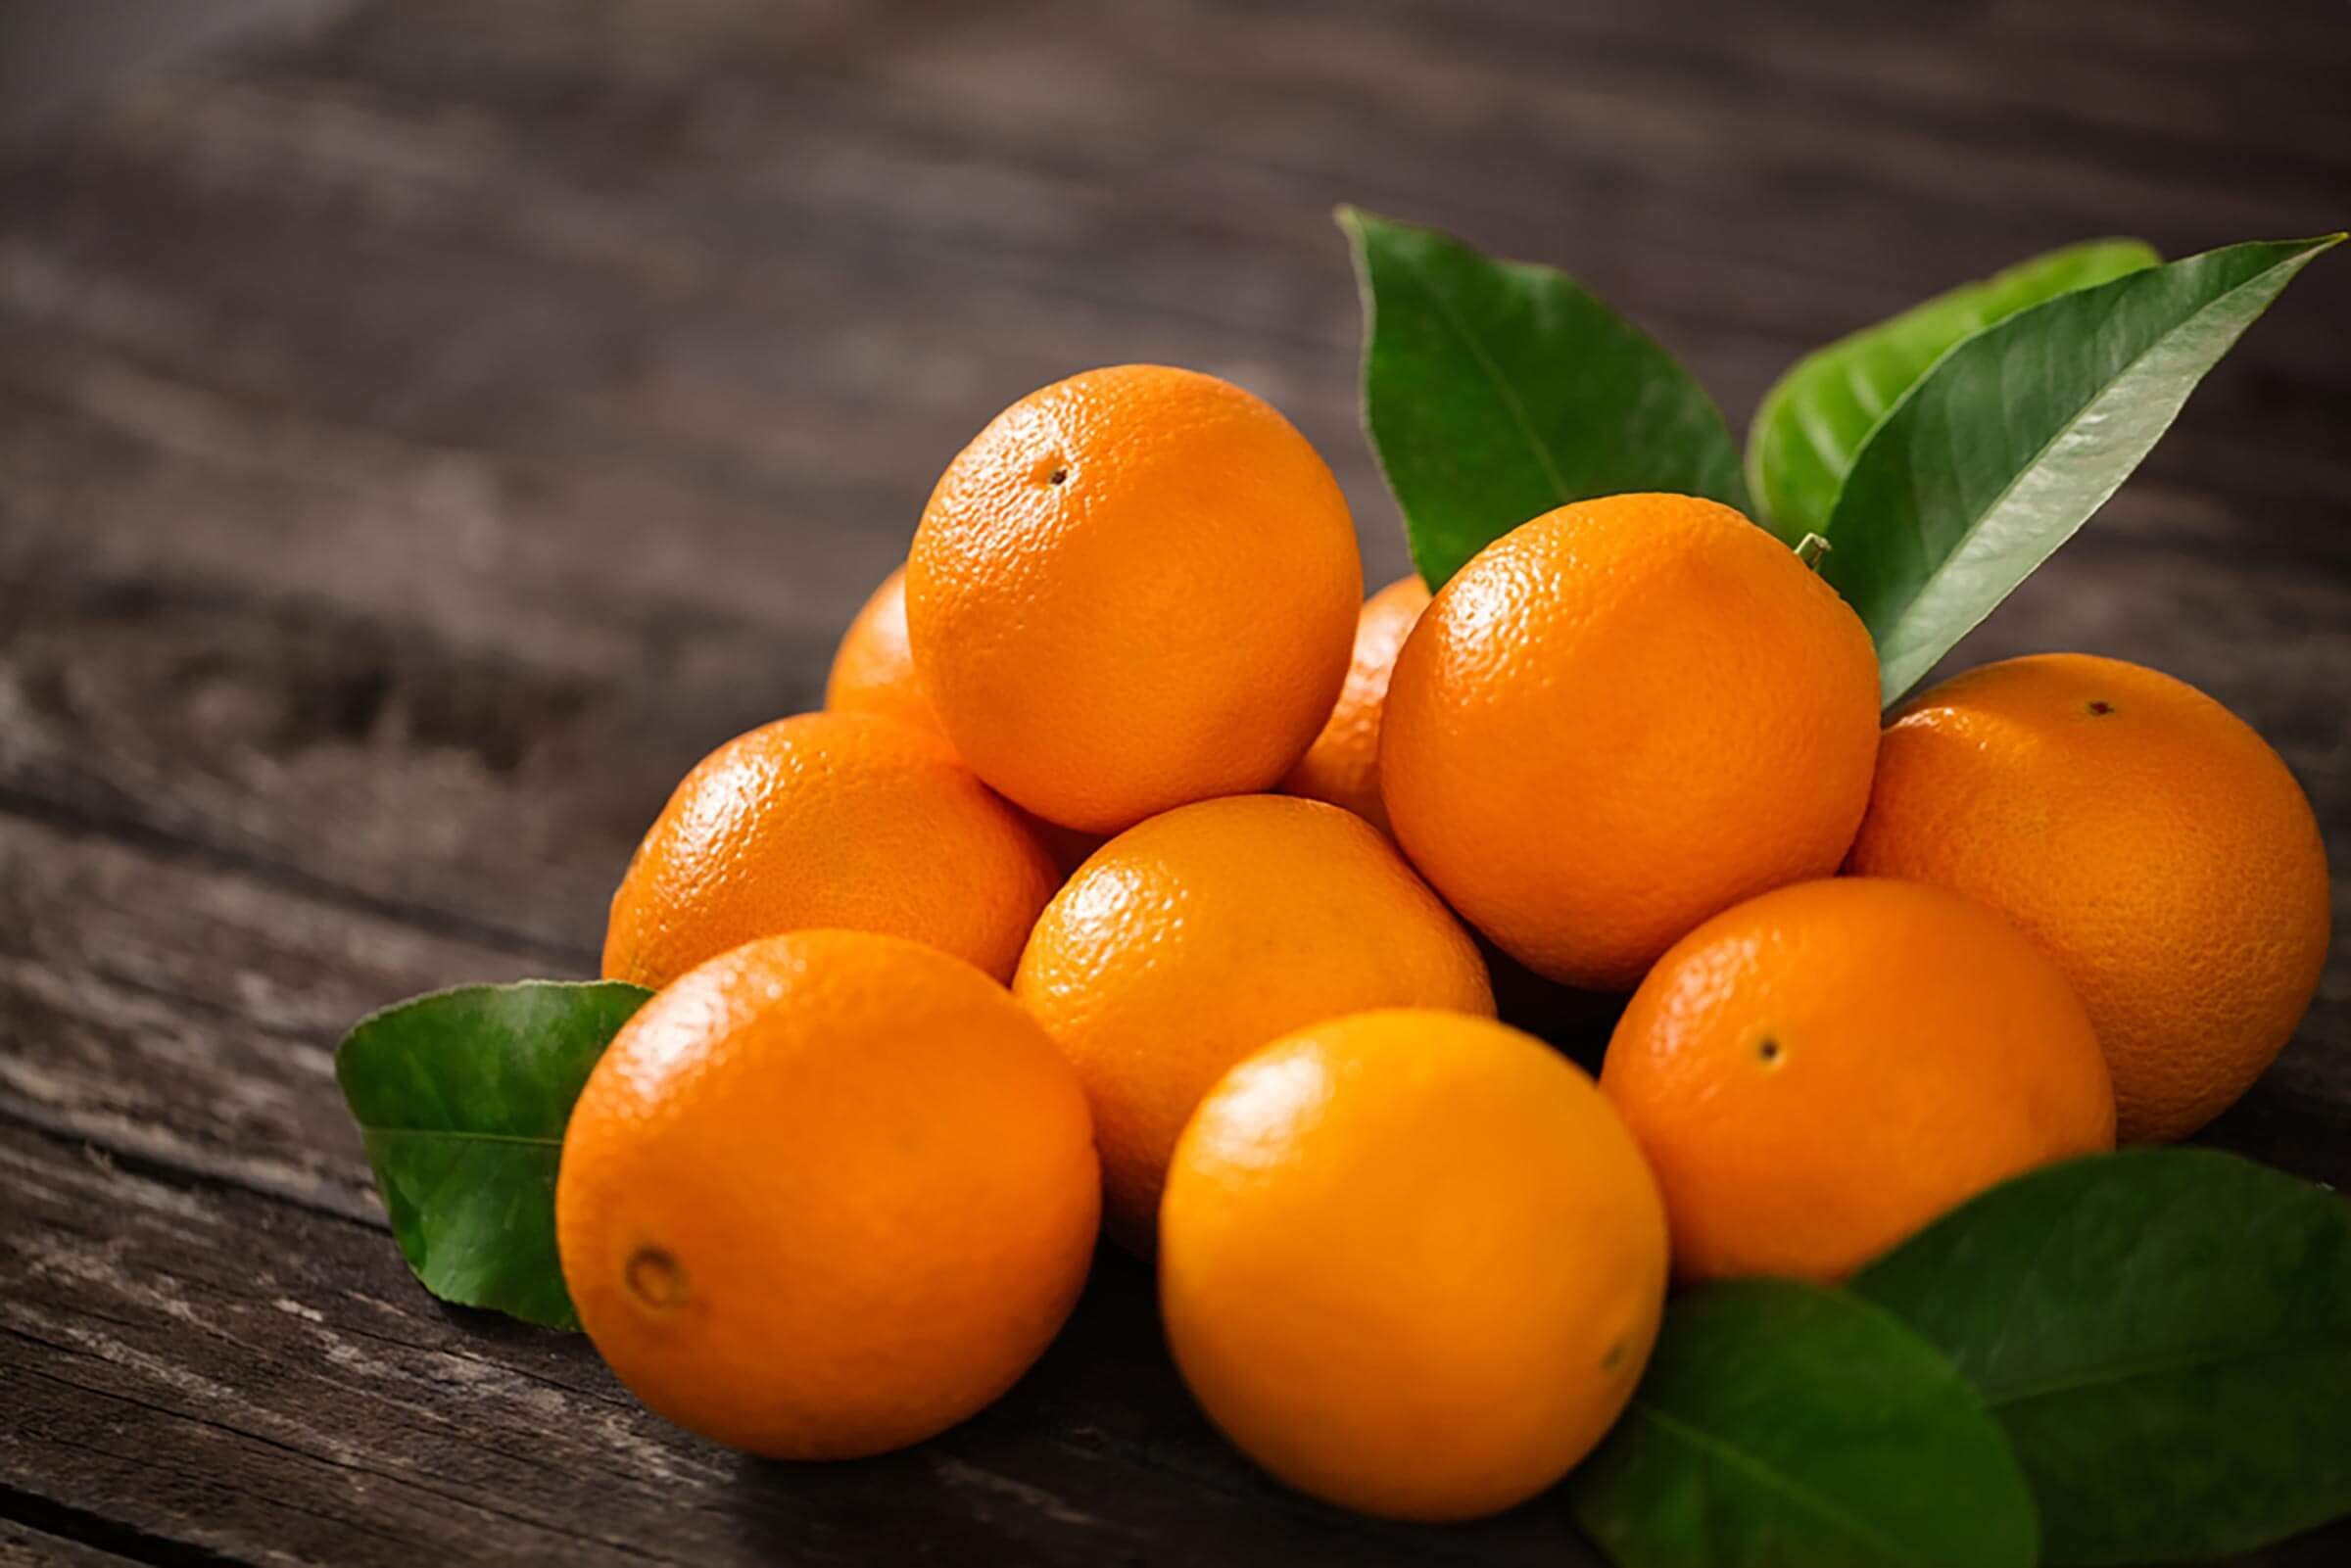 WHICH CAME FIRST: ORANGE THE COLOR OR ORANGE THE FRUIT?